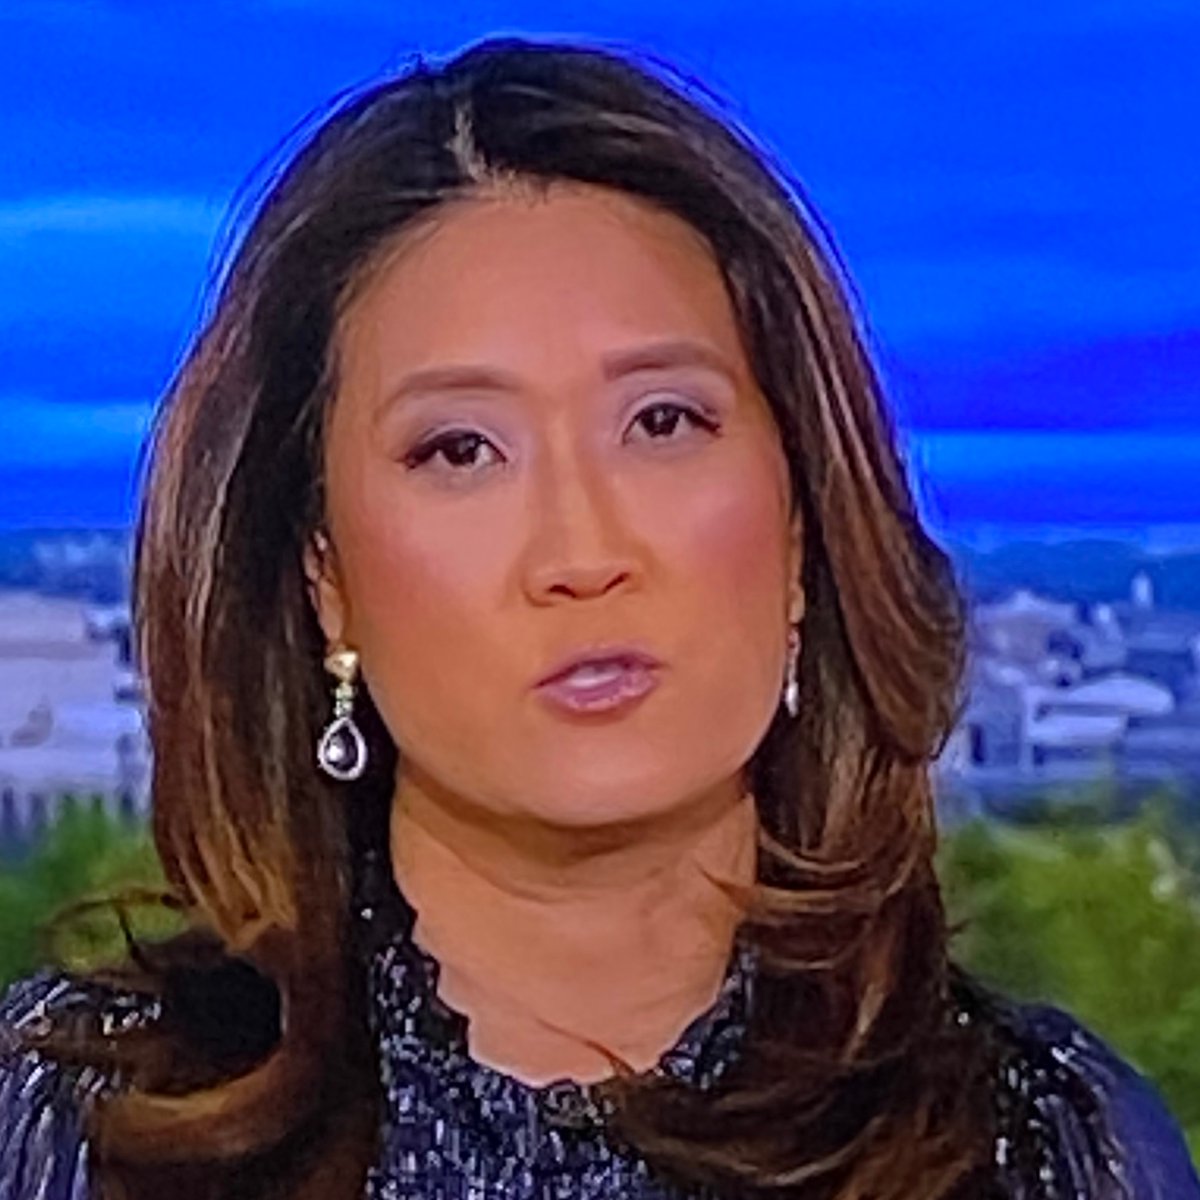 KATIE PHANG has coined the term “bench slapped”. 
@MSNBC  🍄 🦆 😜.